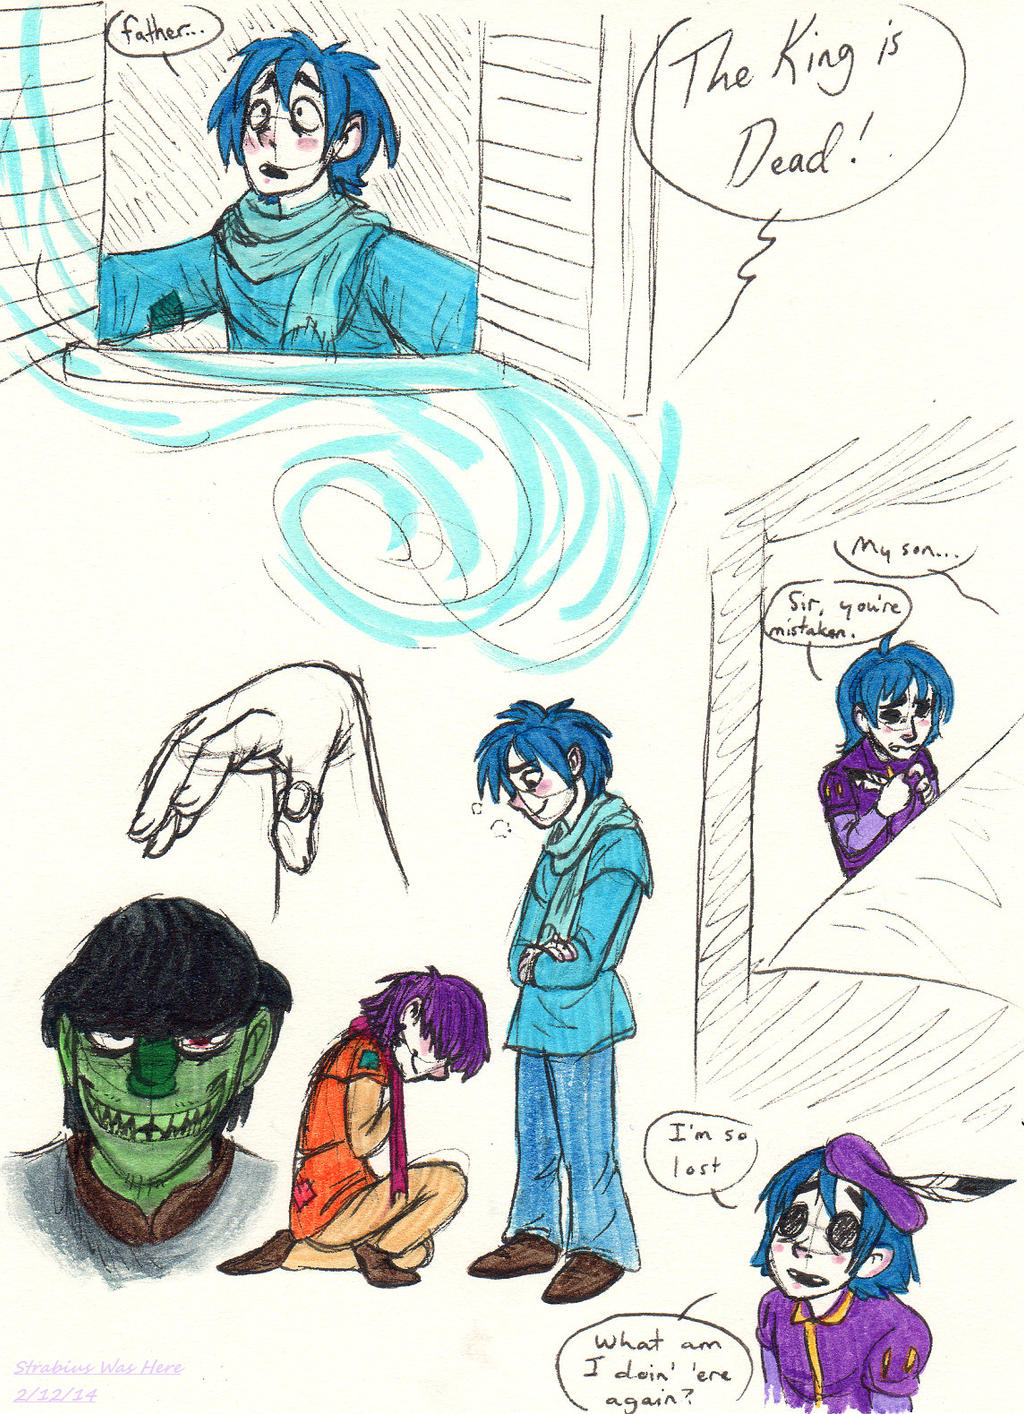 Some More Gorillaz Prince and Pauper Doodles